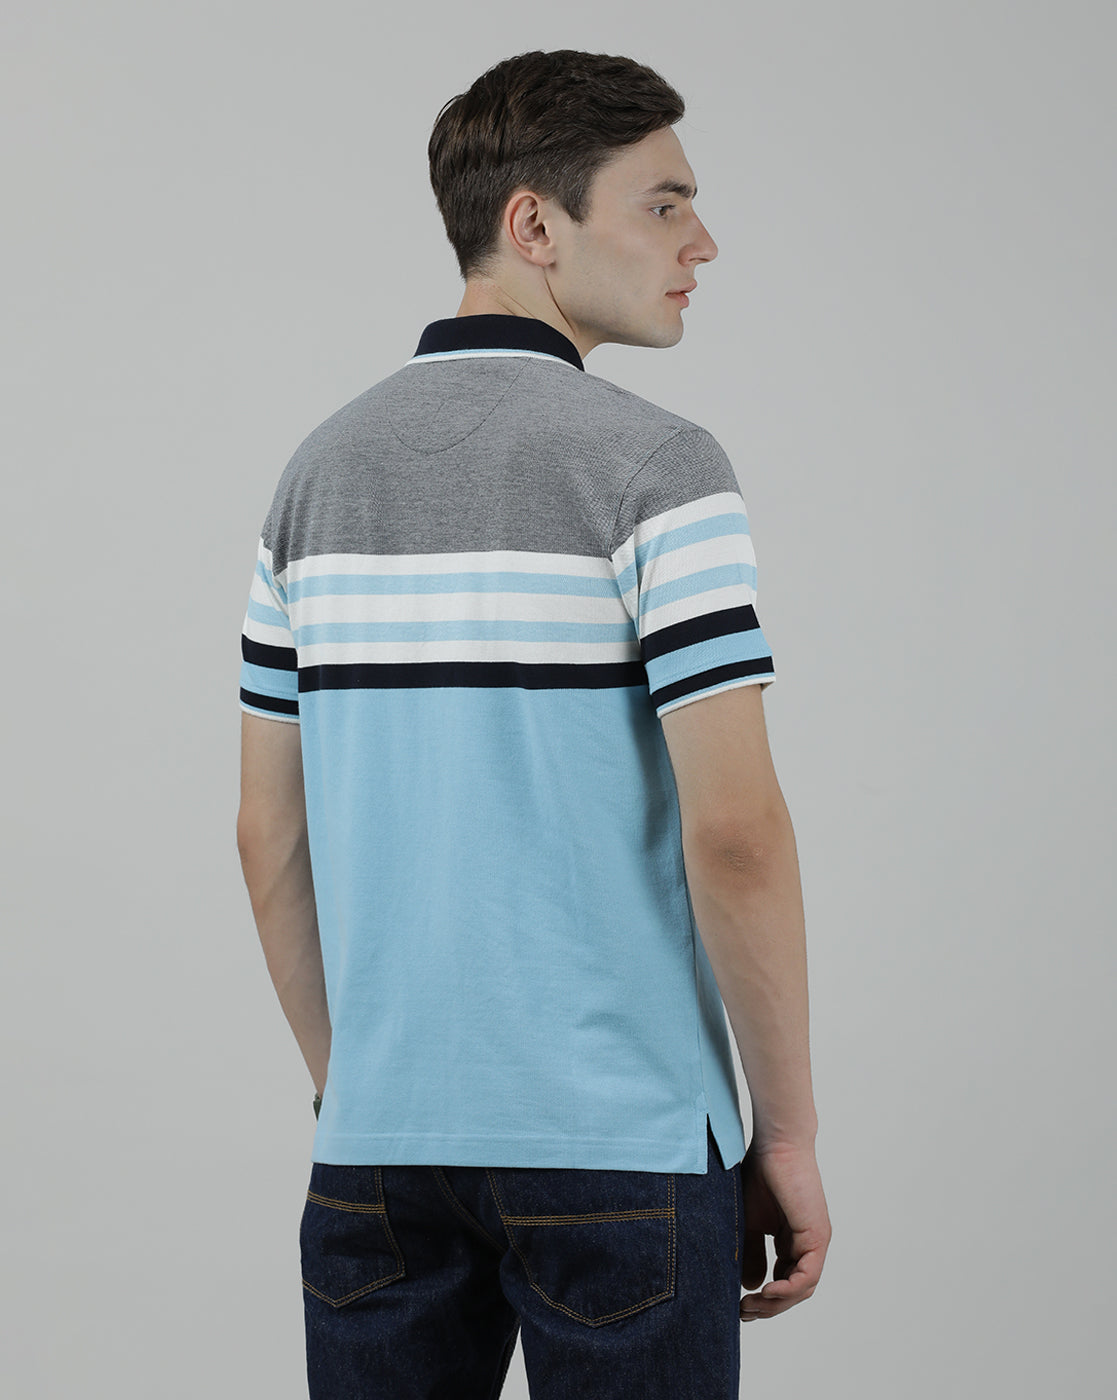 Casual Light Blue T-Shirt Engineering Stripes Half Sleeve Slim Fit with Collar for Men